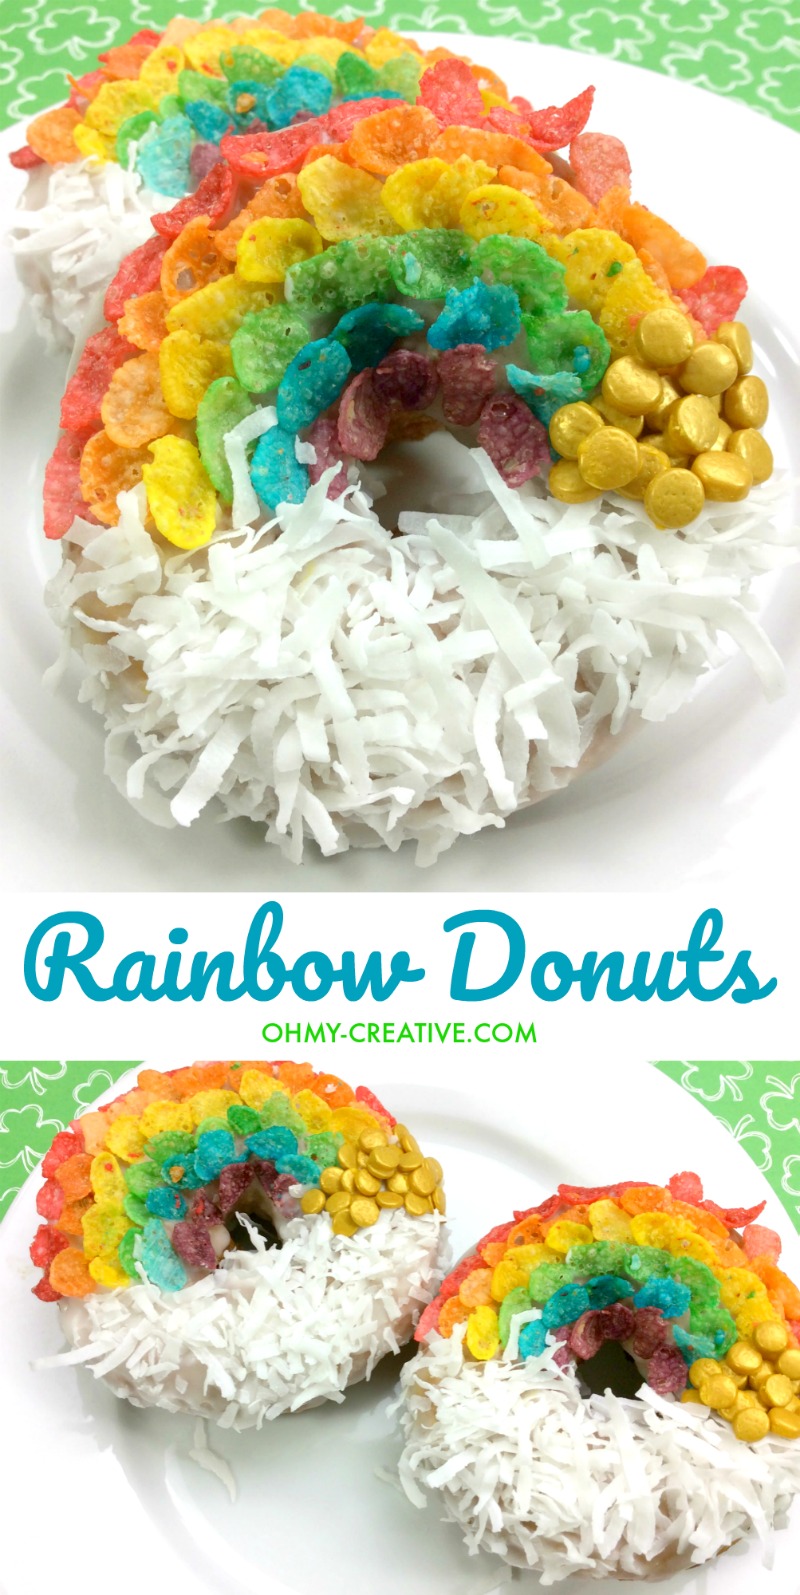 Rainbow Donuts | St. Patrick's Day Donuts | OHMY-CREATIVE.COM | St. Patrick's Day Donuts | St. Patrick's Day Food | St. Patrick's Day Party Ideas | St. Patrick's Day Desserts | St. Patrick's Day Treats | Doughnuts | Coconut Donuts 